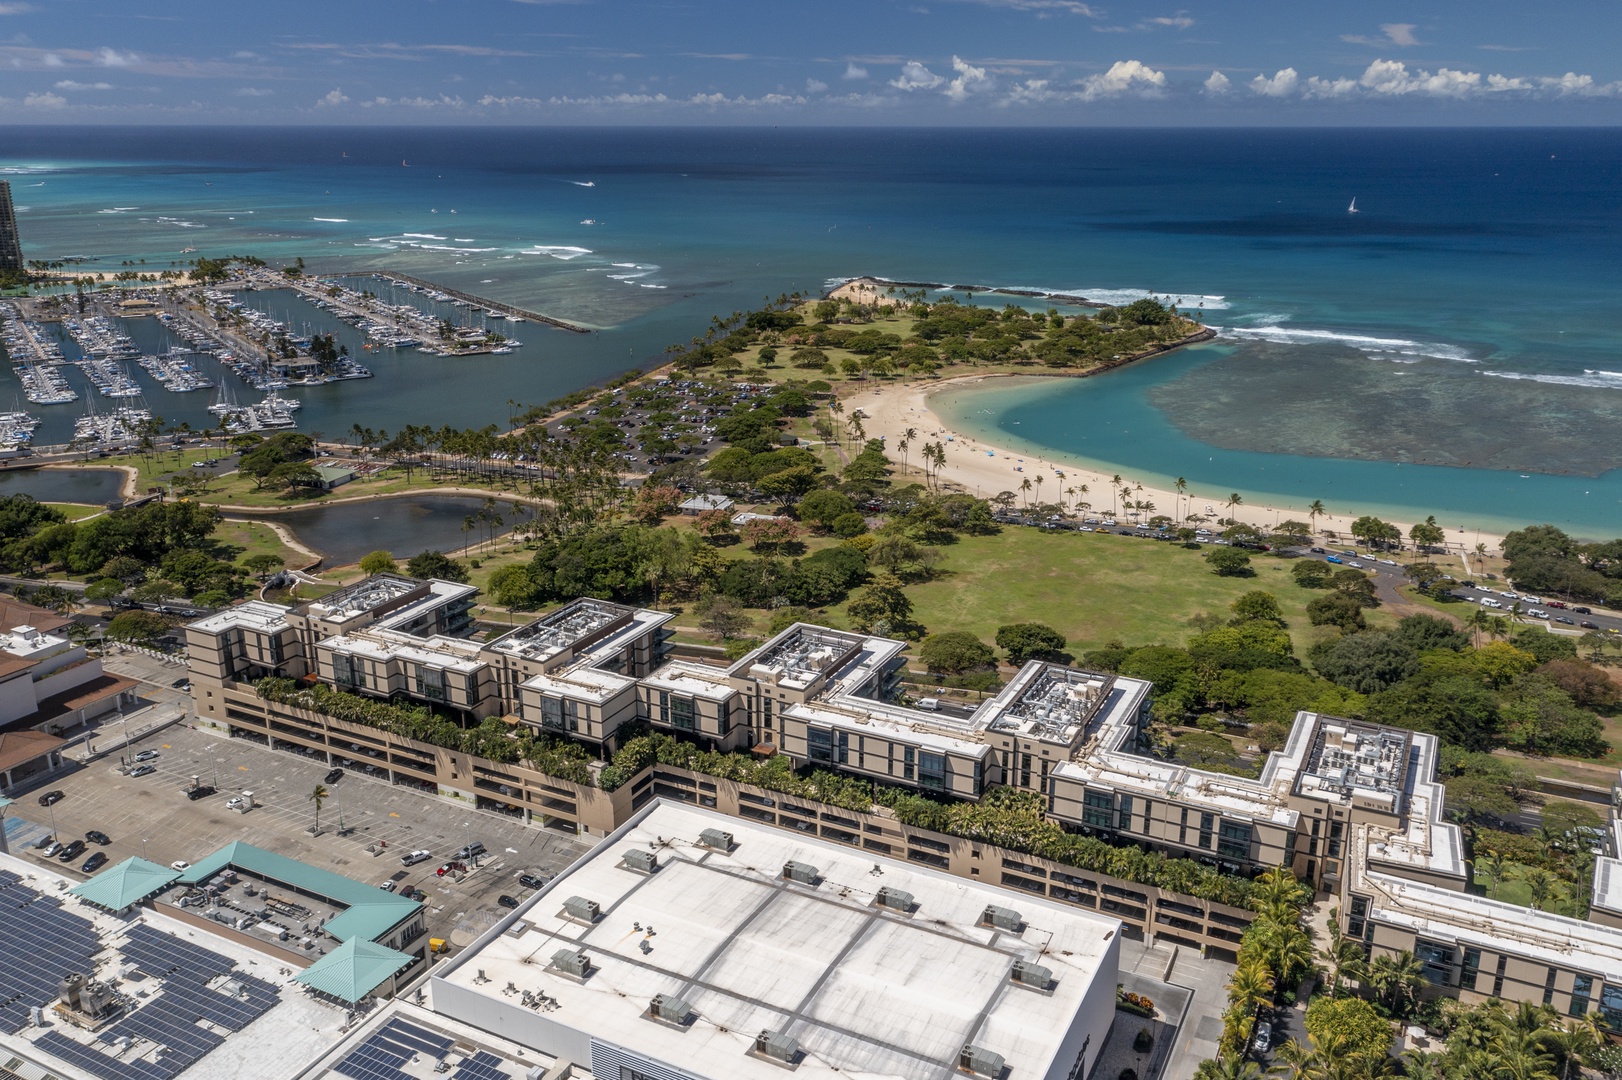 Honolulu Vacation Rentals, Park Lane Sky Resort - Park Lane Ala Moana is situated right at the ocean front